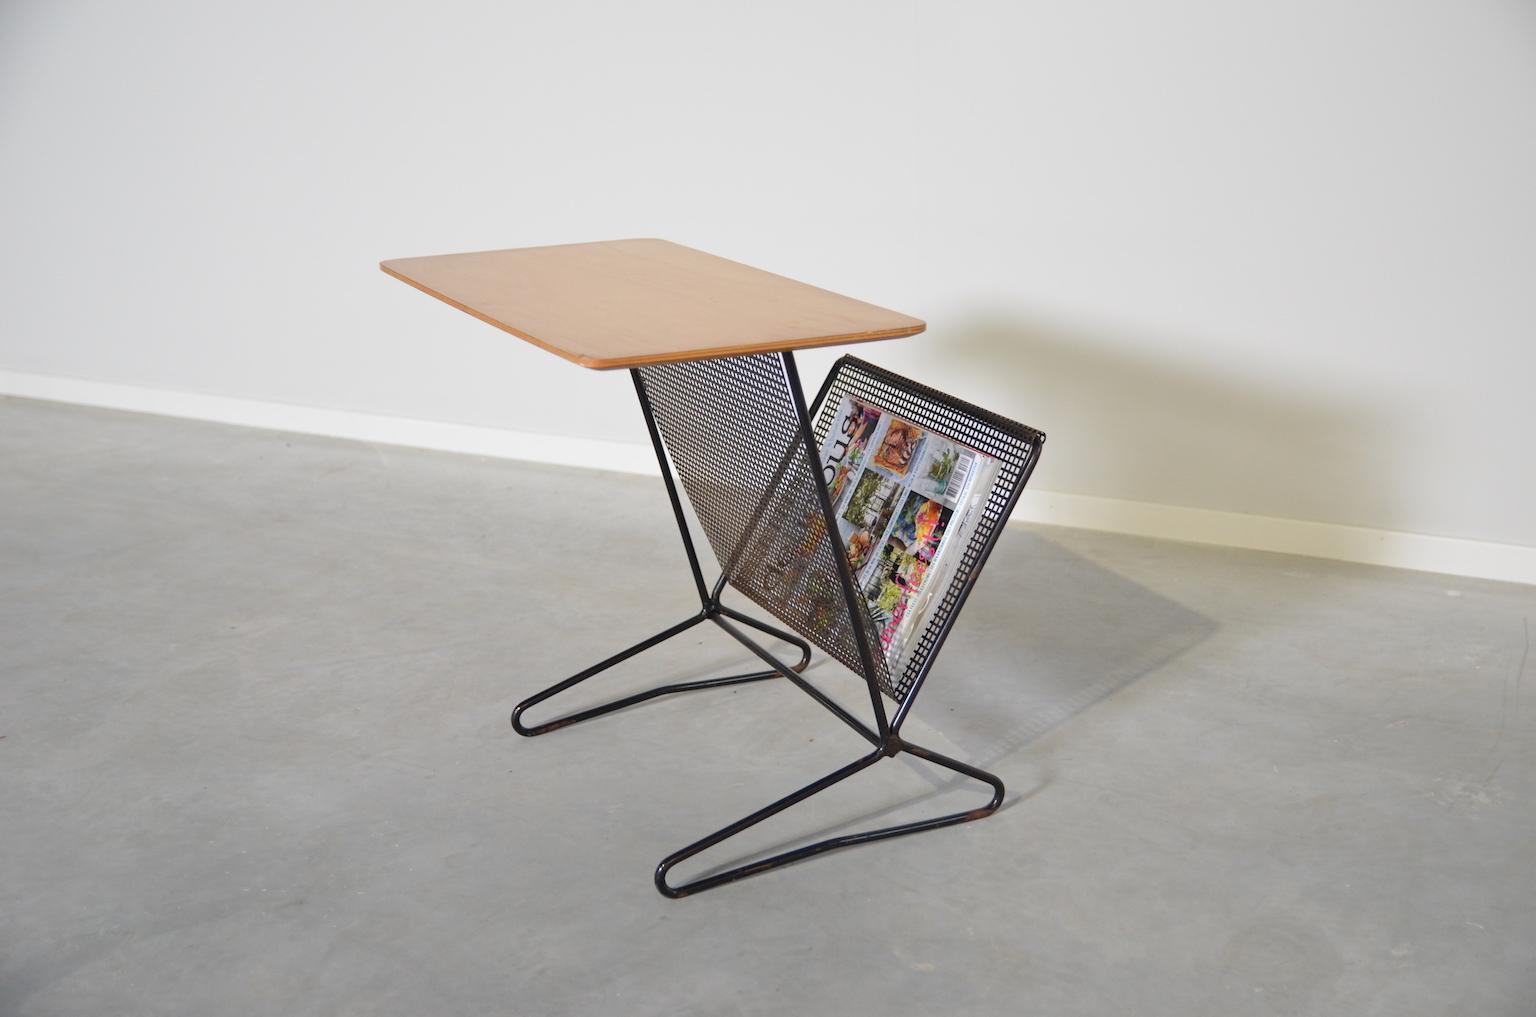 Midcentury side table with magazine rack TM05 by Dutch designer Cees Braakman for Pastoe. Birch tabletop on black metal base. The magazine rack is made of perforated metal plate. The tabel top measures 55 x 30 cm.